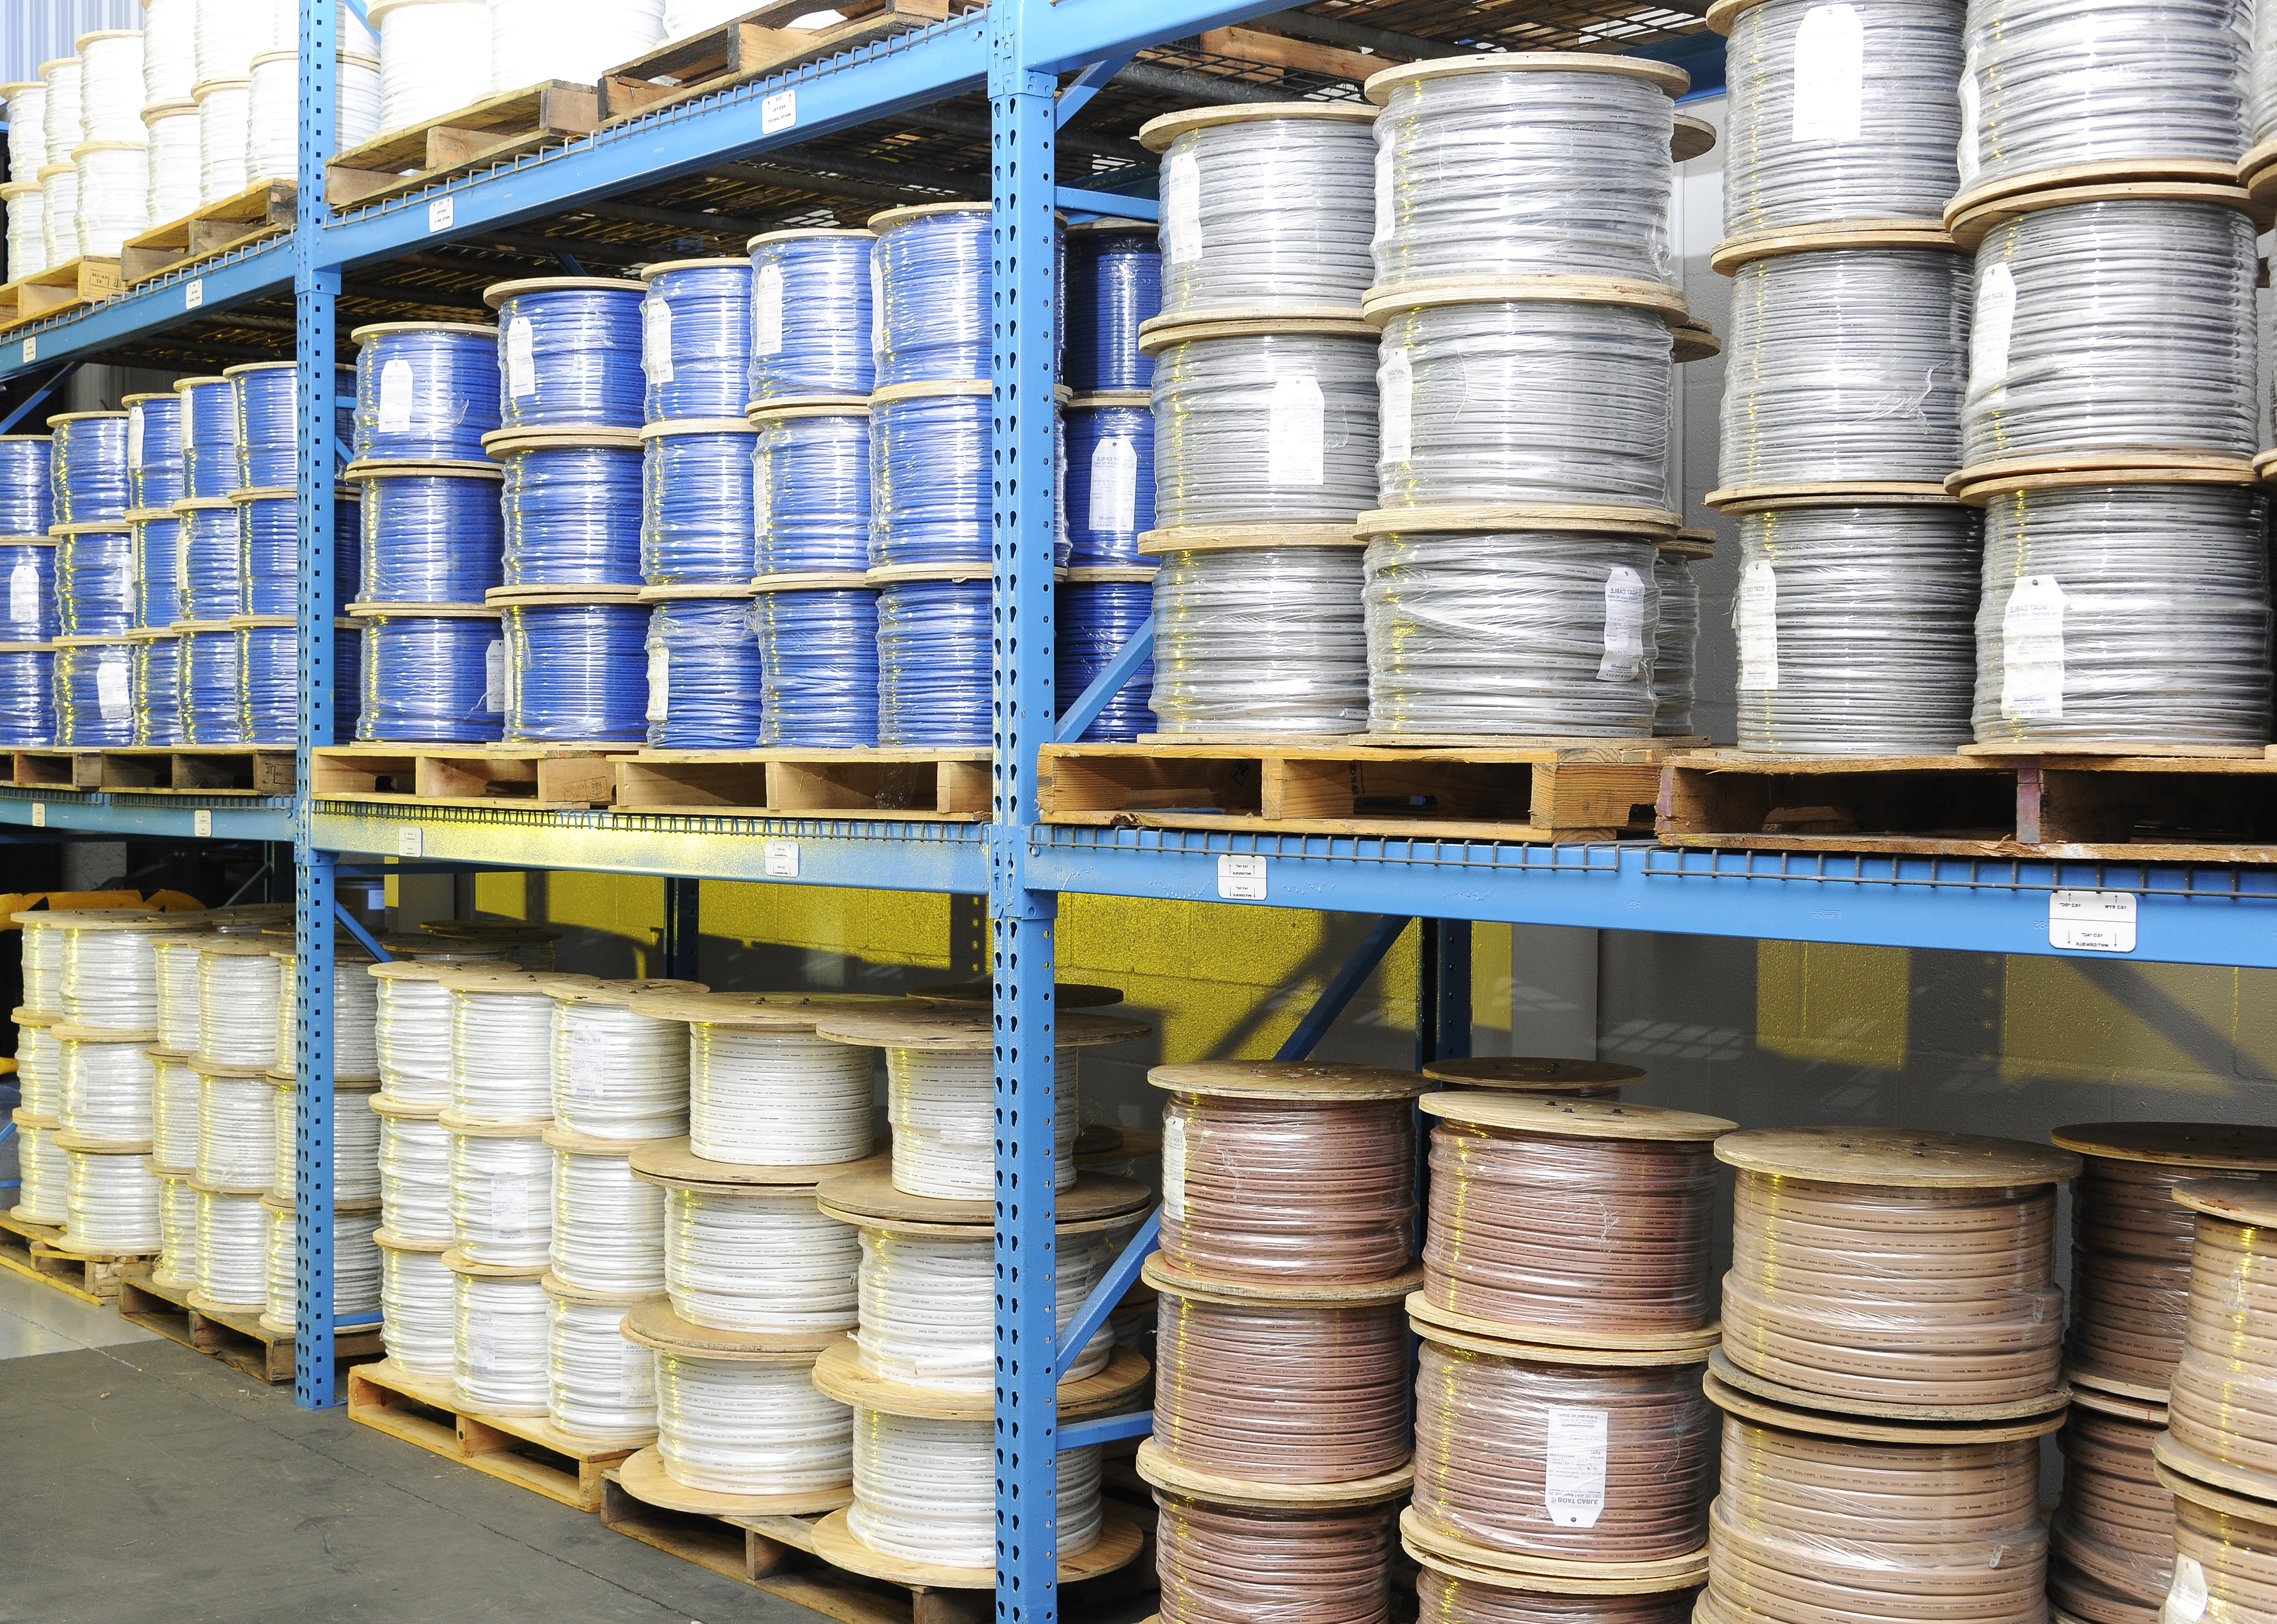 Why Pacer Group wire is in such high demand